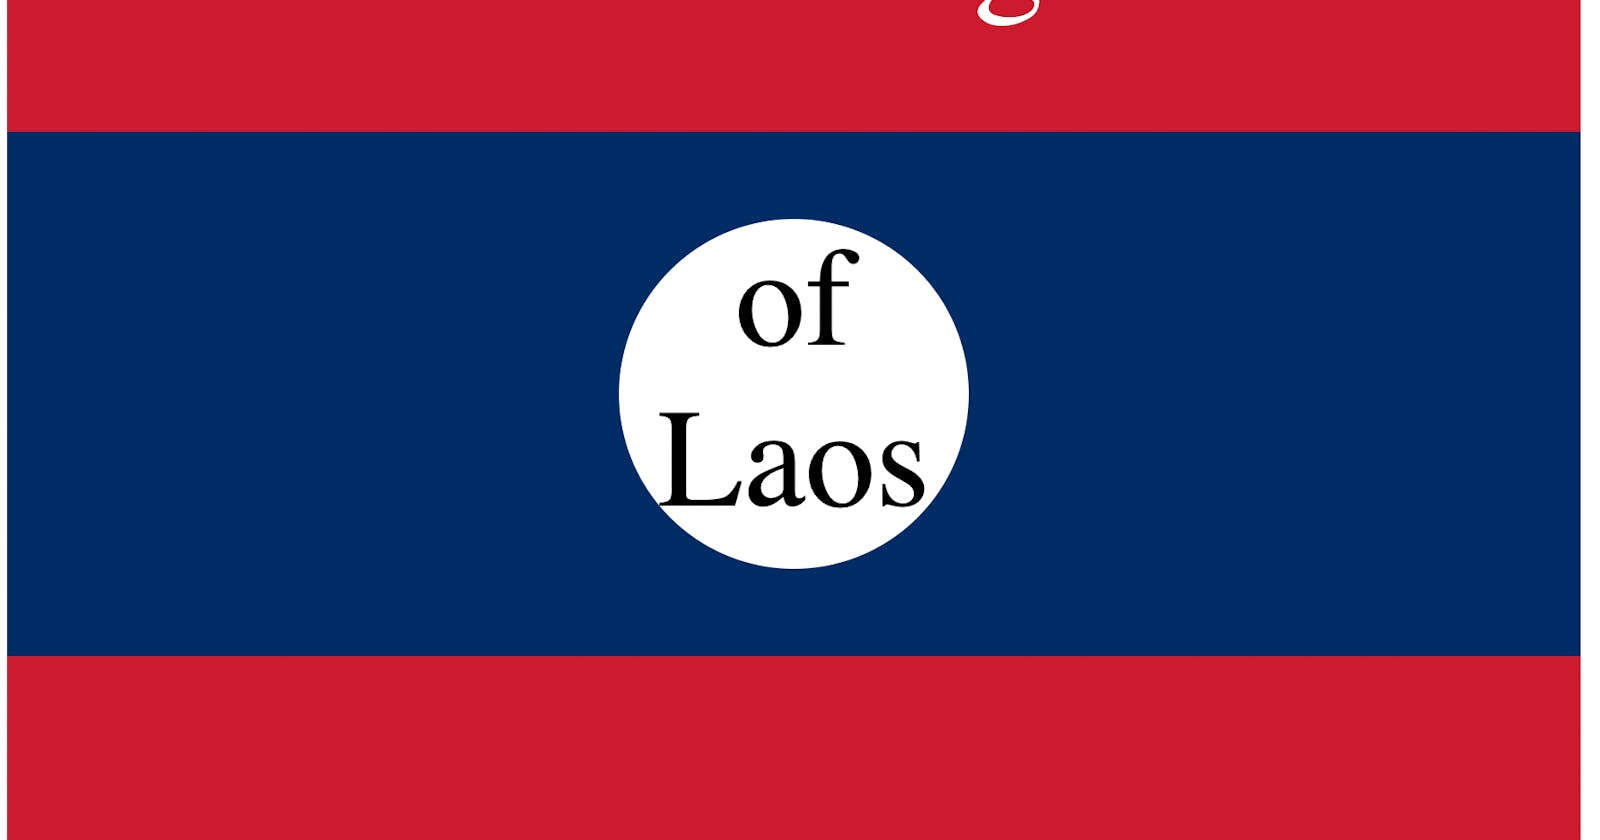 Crafting the Flag of Laos with HTML and CSS